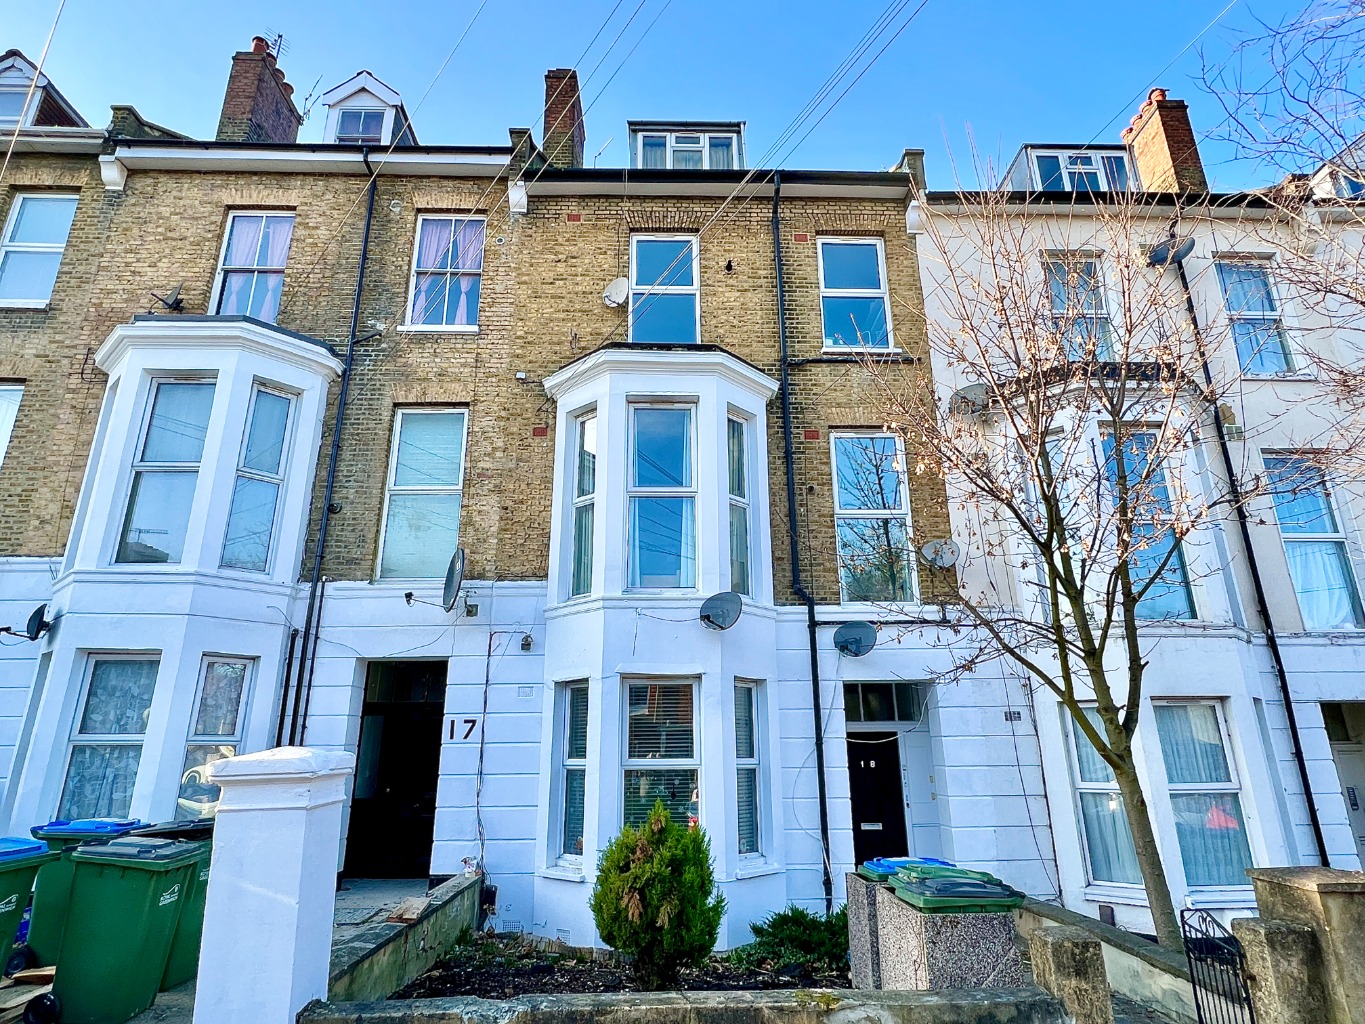 Beaumont Gibbs are offering for sale this lovely two bedroomed first floor Victorian conversion flat for sale. The flat is situated in a very popular and residential road, close by to local amenities.